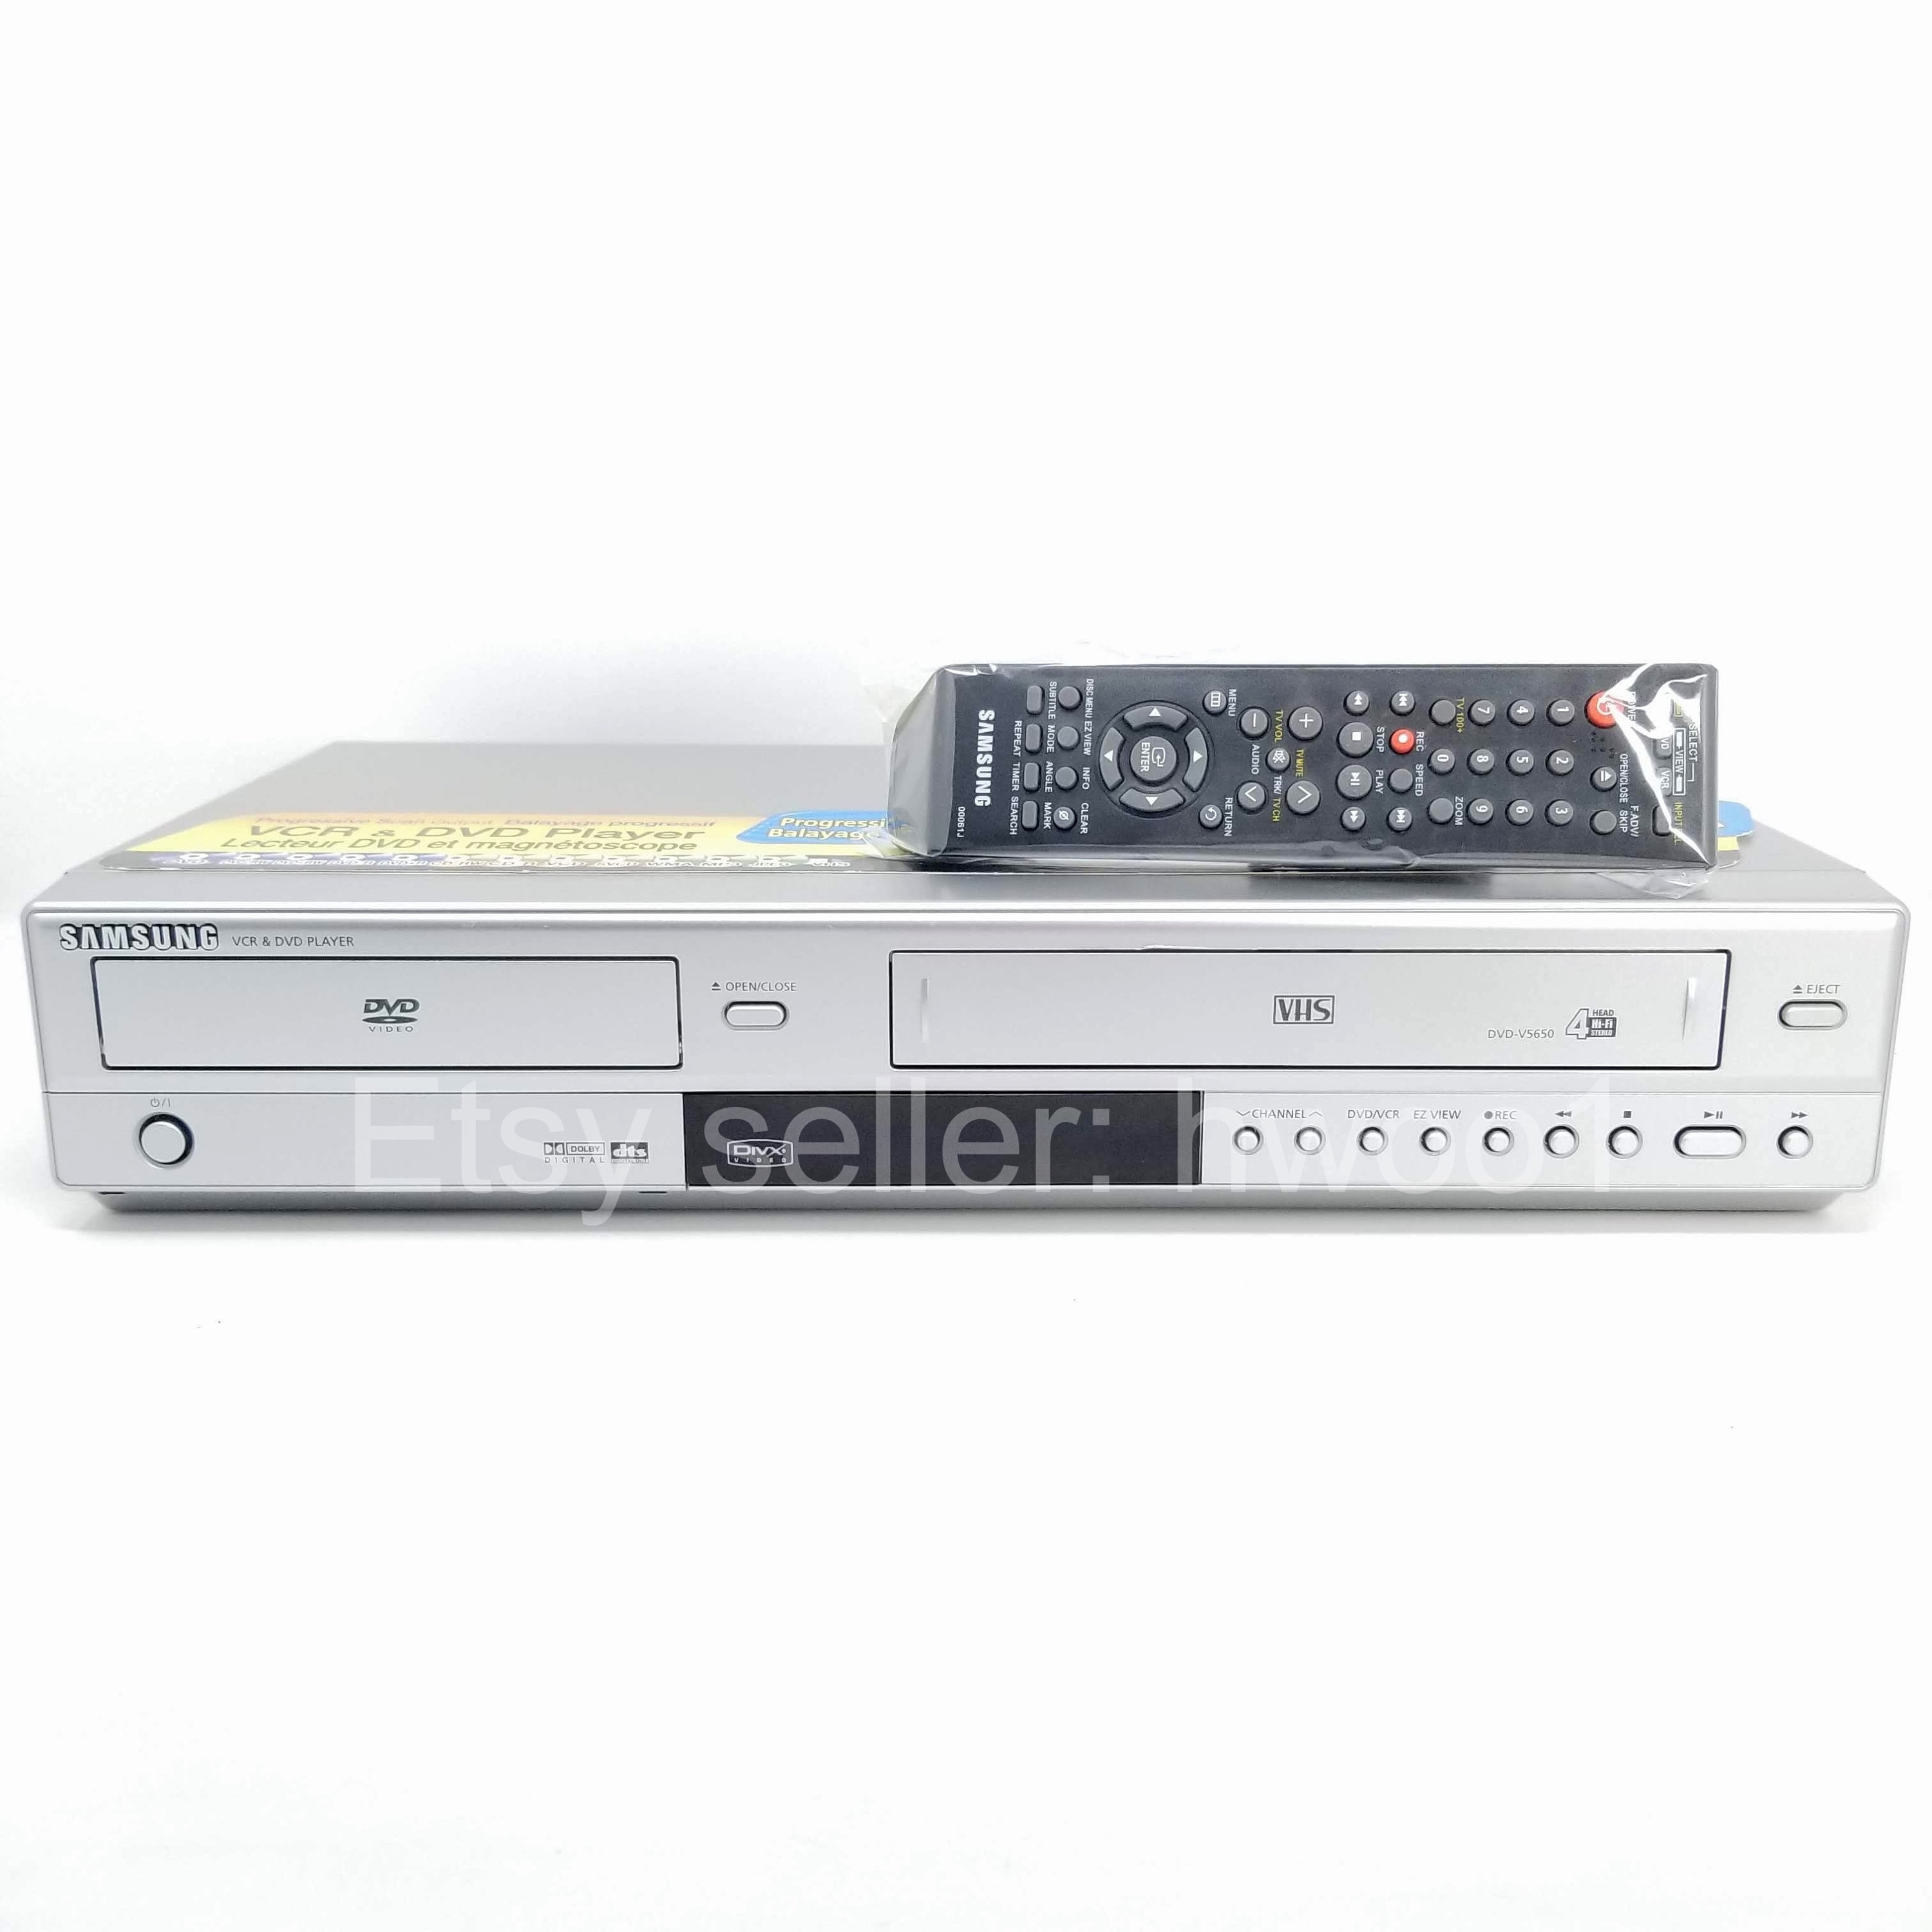 engineering meester Civic Samsung DVD VCR Combo DVD-V5650 W/ Remote Tested Lens & - Etsy